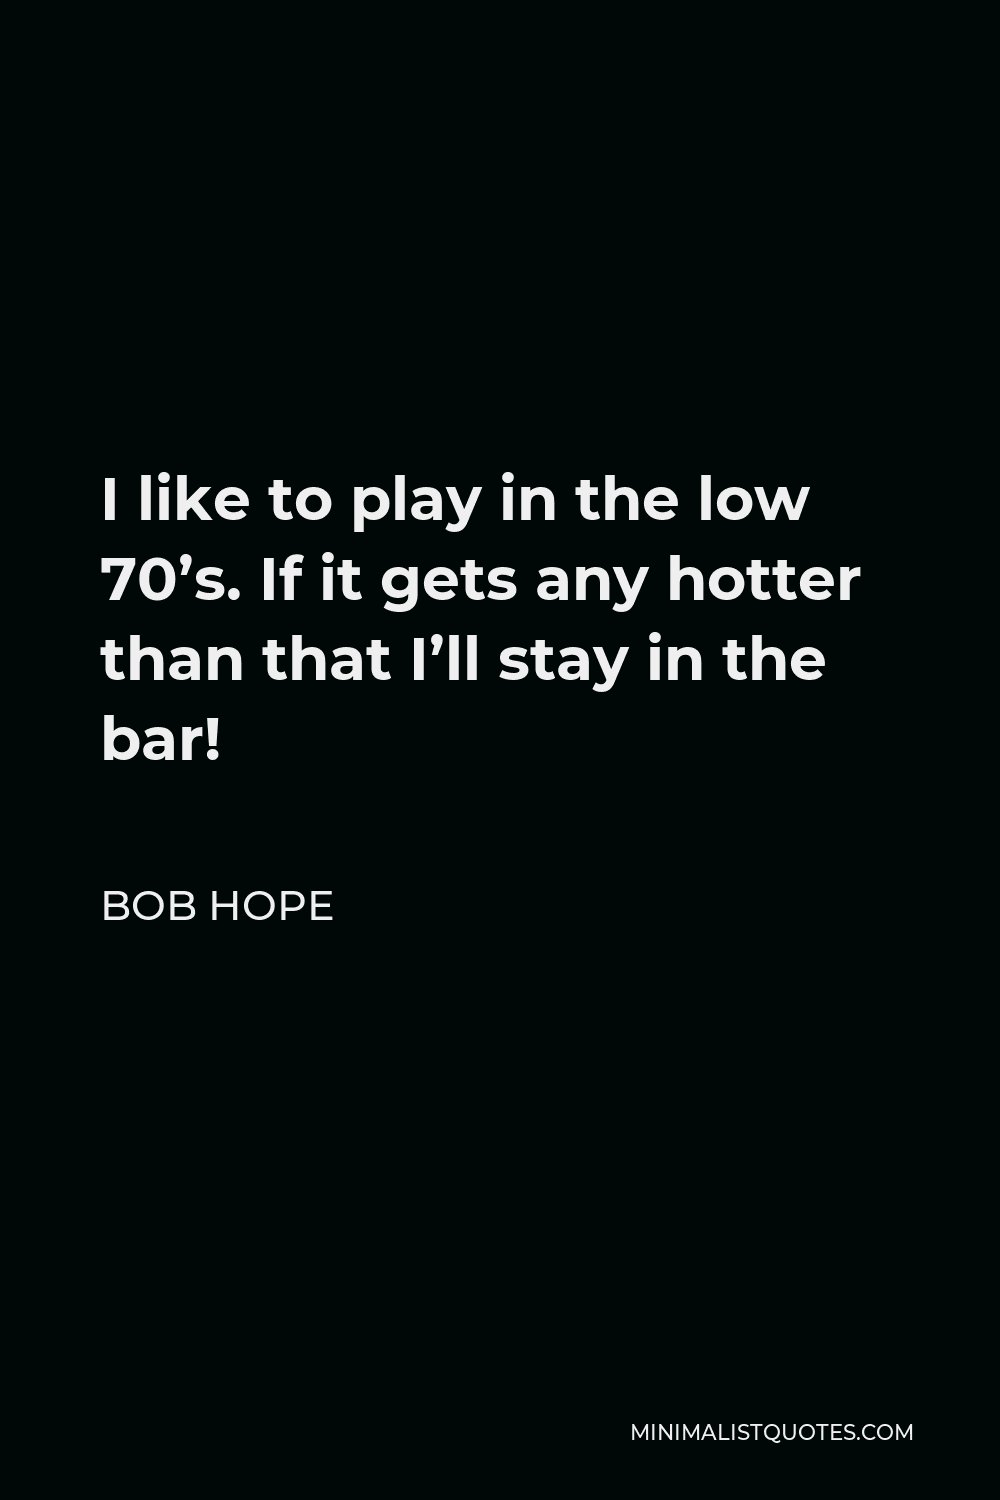 Bob Hope Quote - I like to play in the low 70’s. If it gets any hotter than that I’ll stay in the bar!